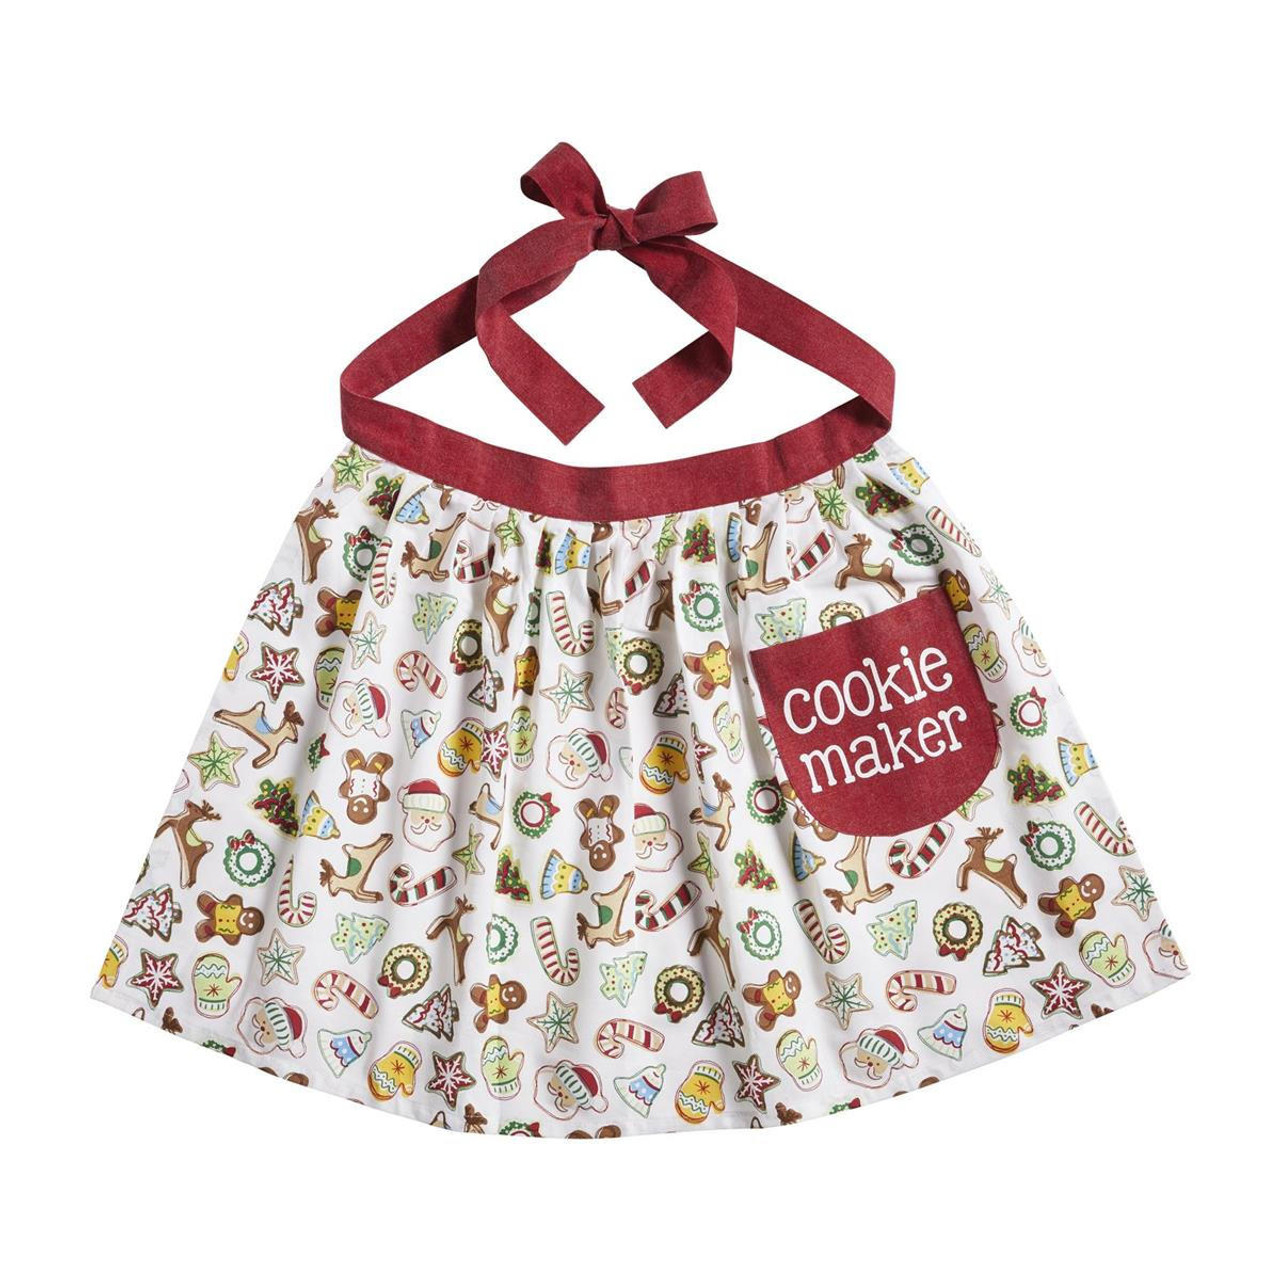 https://cdn11.bigcommerce.com/s-m5vcu70215/images/stencil/1280x1280/products/257/2132/mudpie-mud-pie-mommy-and-me-christmas-cookie-apron-set__64550.1692302588.jpg?c=1